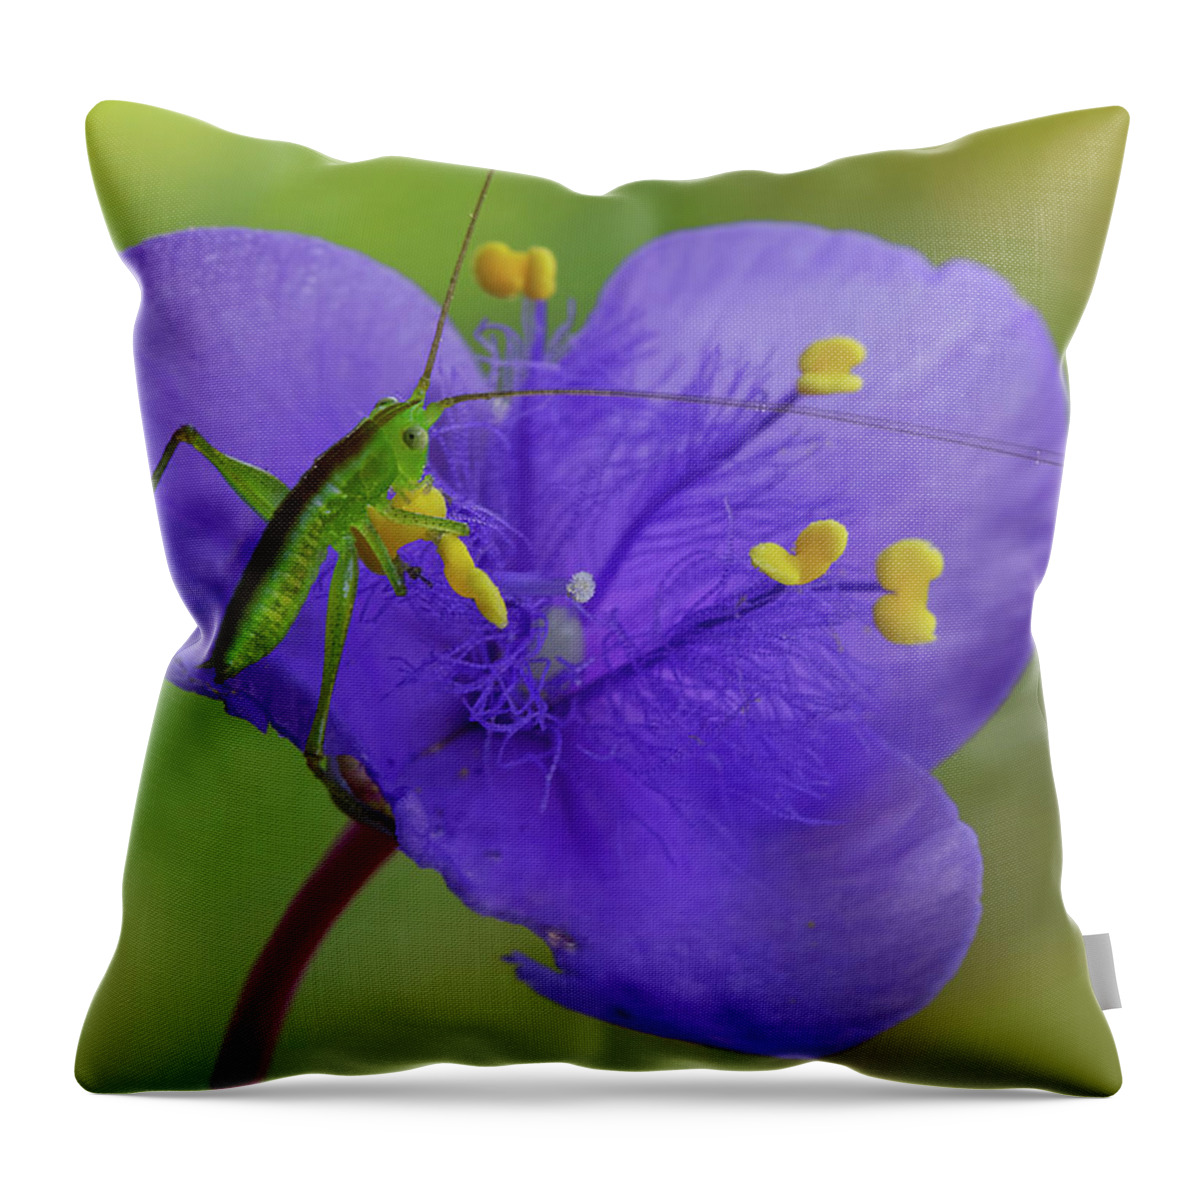 2016 Throw Pillow featuring the photograph Green and Purple by Robert Charity